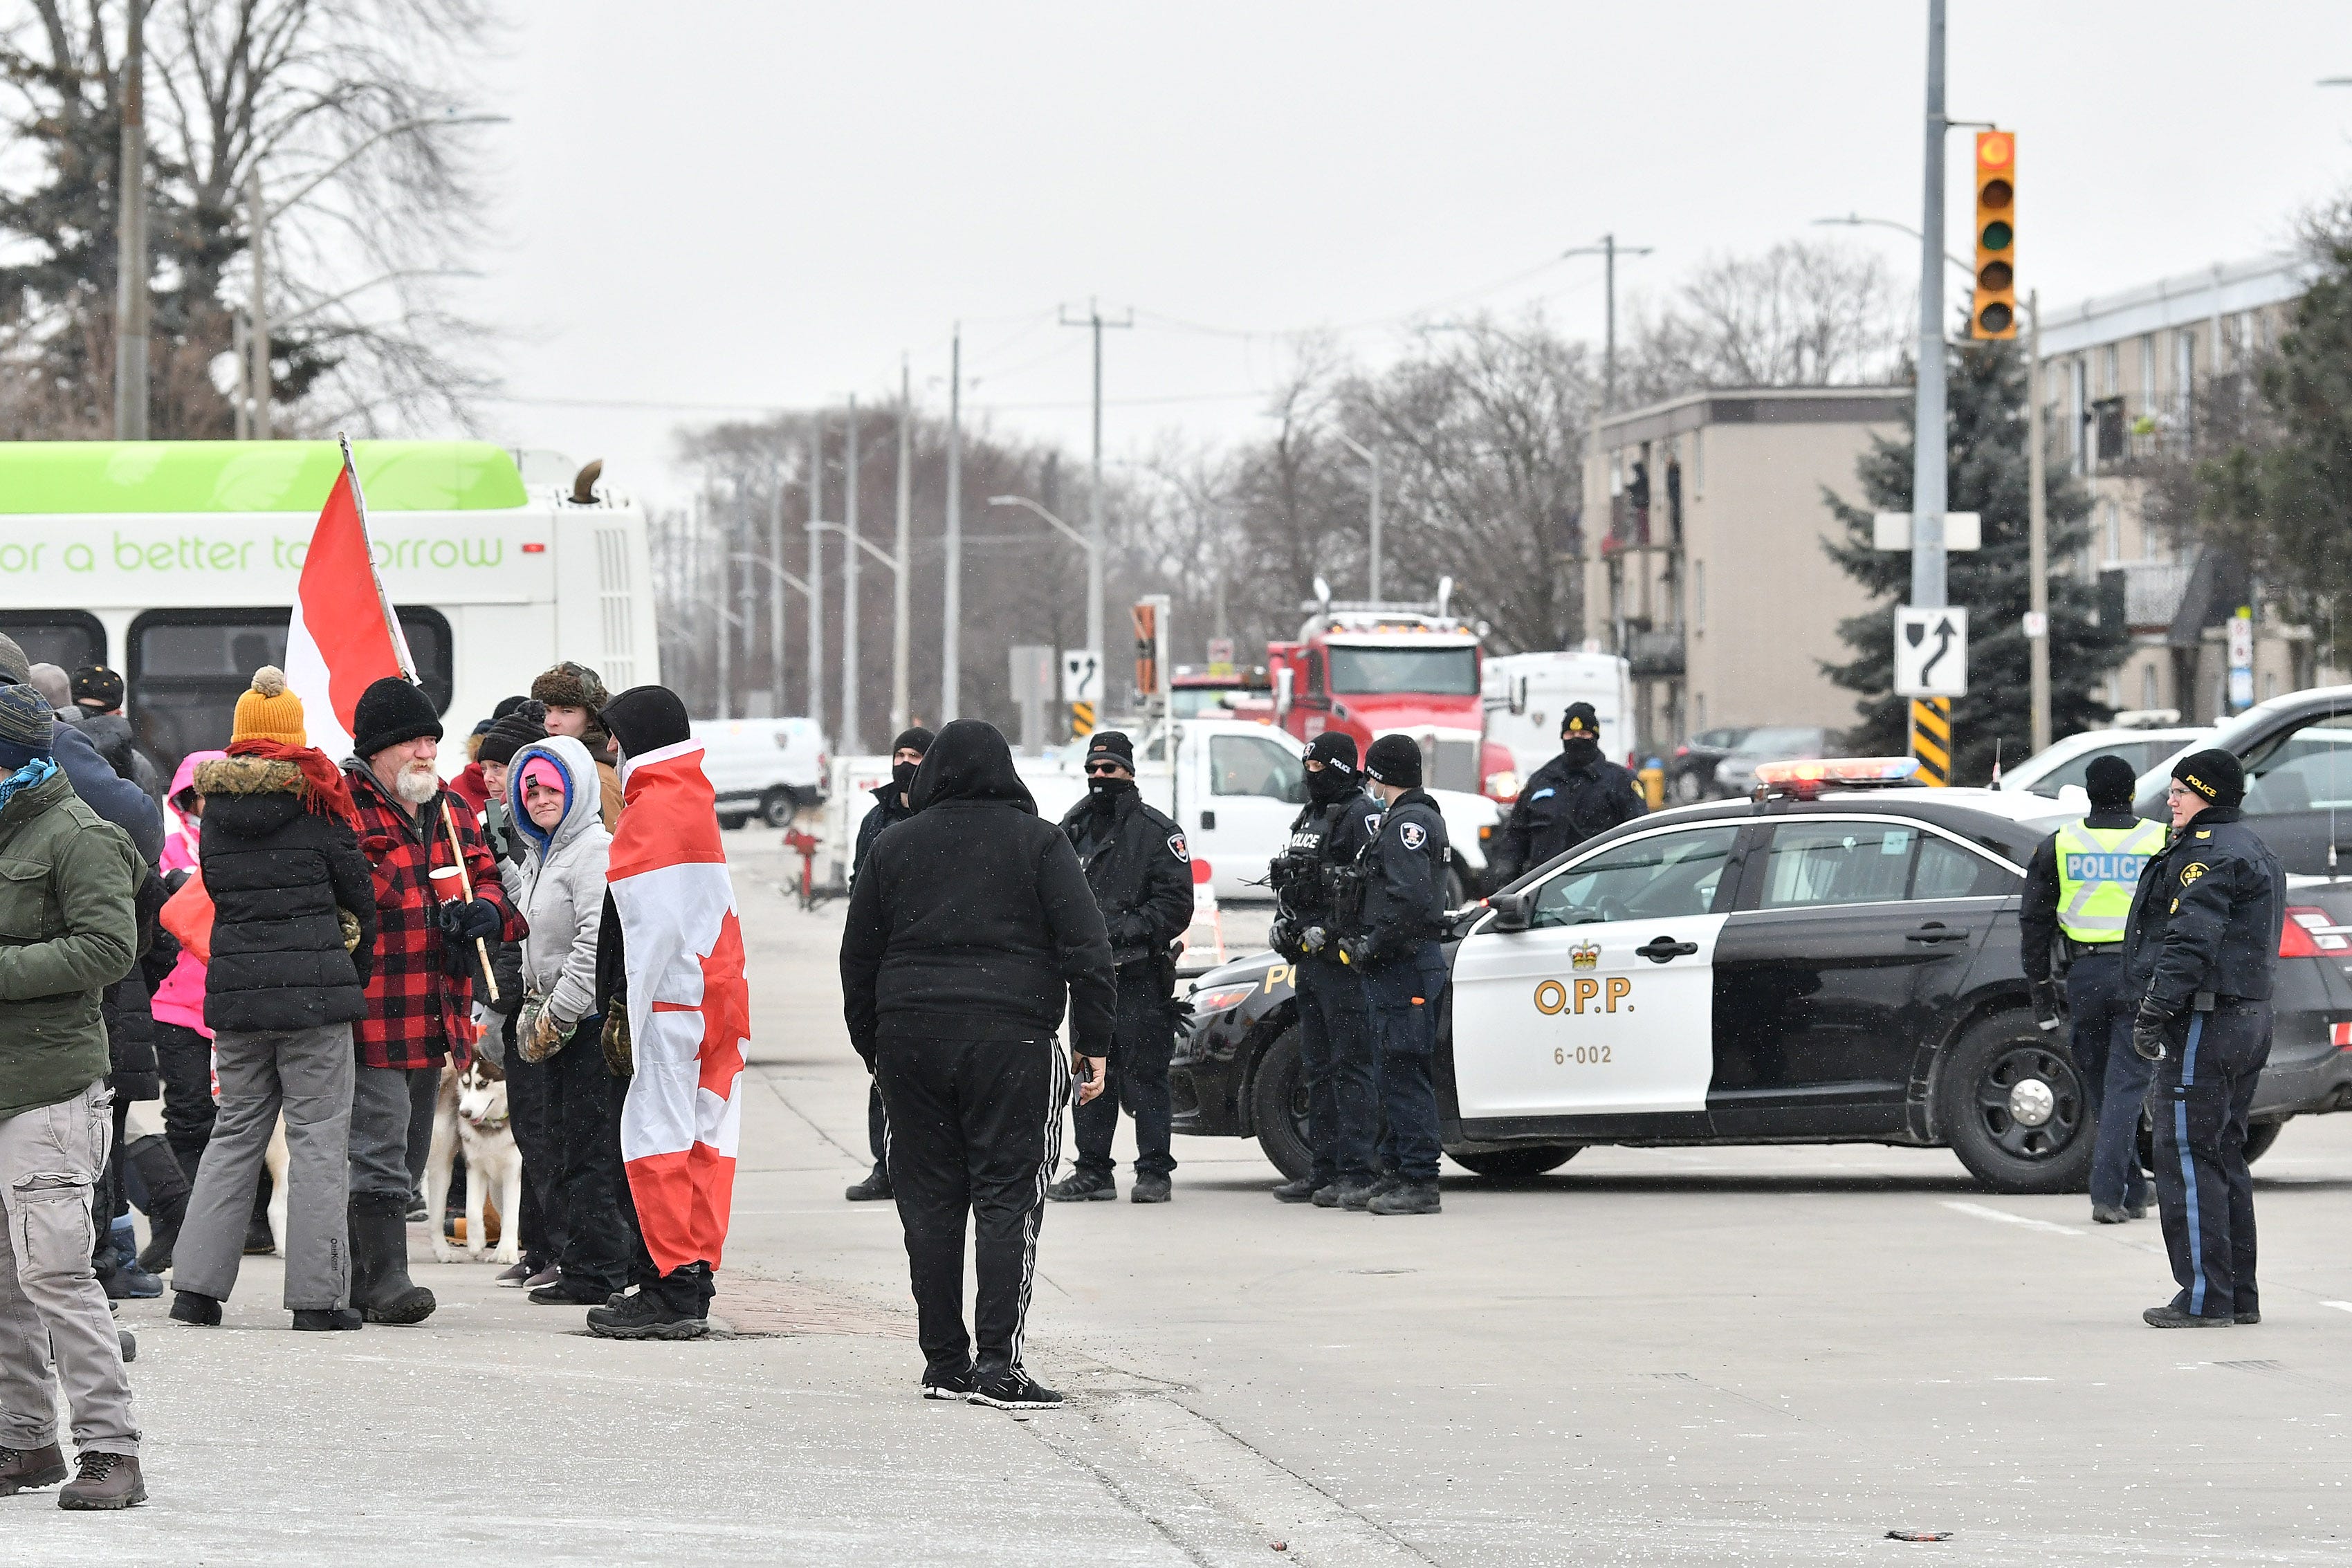 Protesters in Windsor, Ontario, on Feb. 13, 2022.  
(Robin Buckson / The Detroit News)